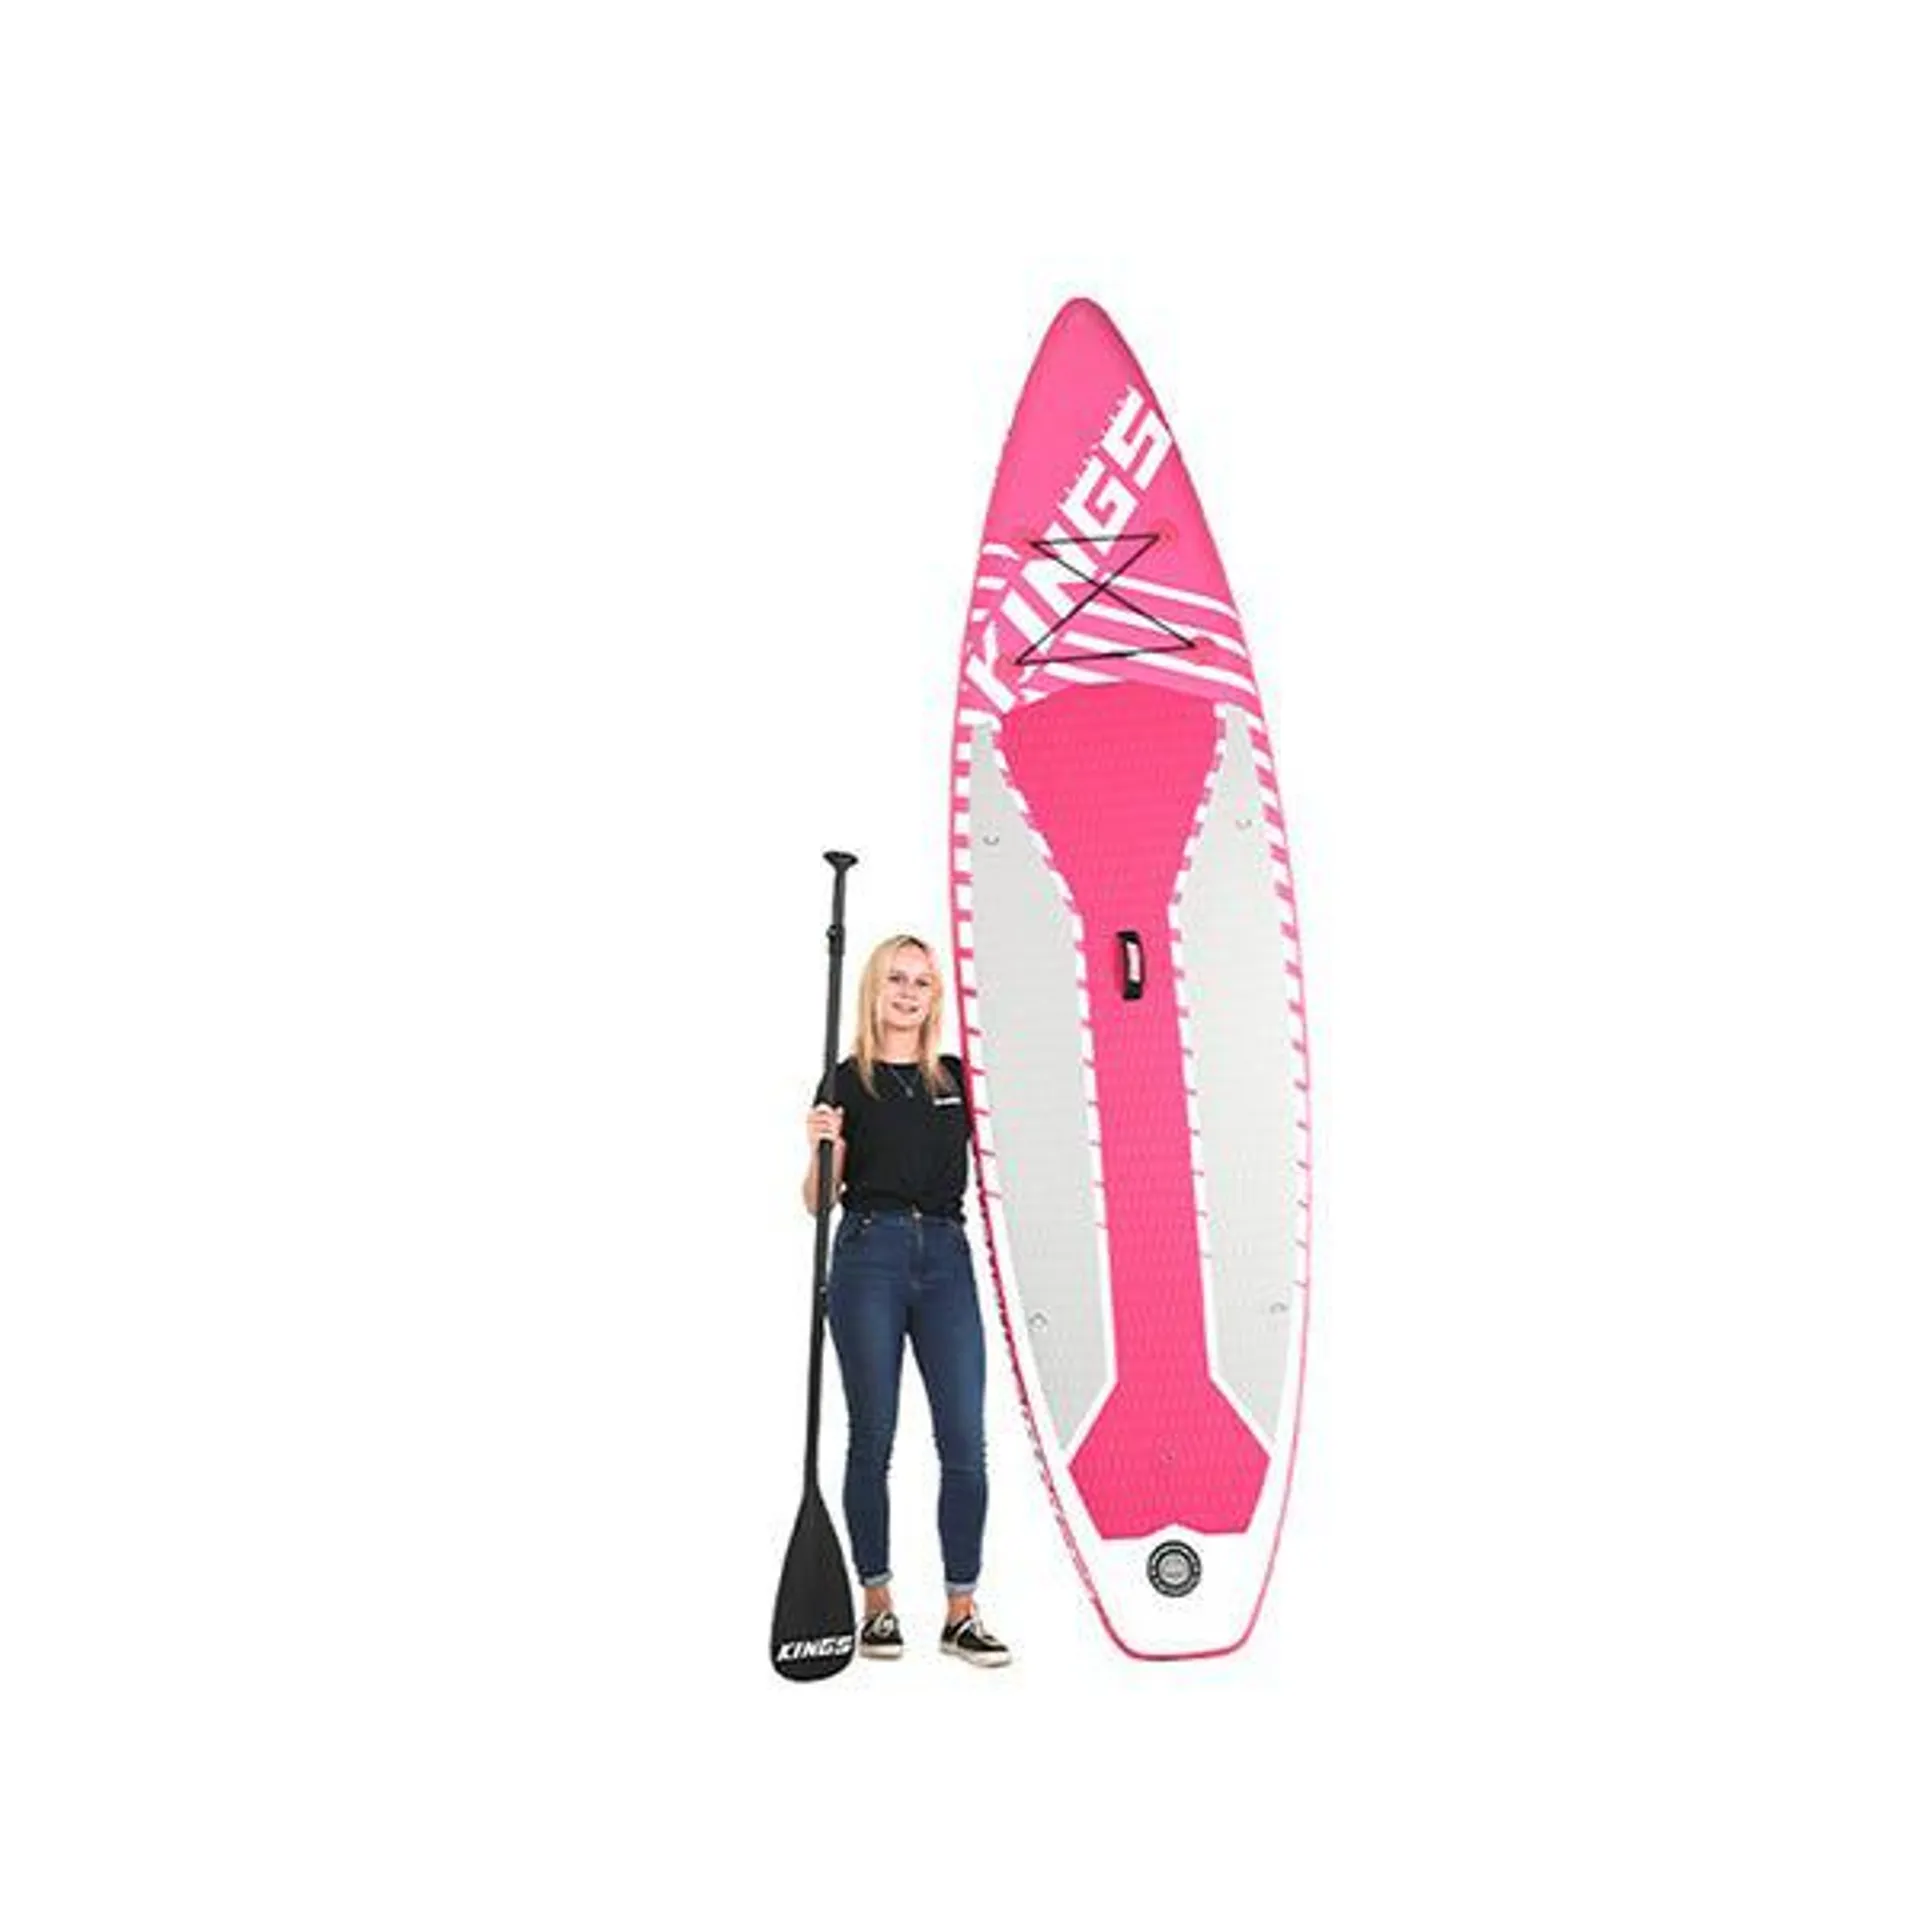 Kings Pink Inflatable Stand-Up Paddle Board | 10ft 6in | HUGE 150kg rating | Inc. paddle & more